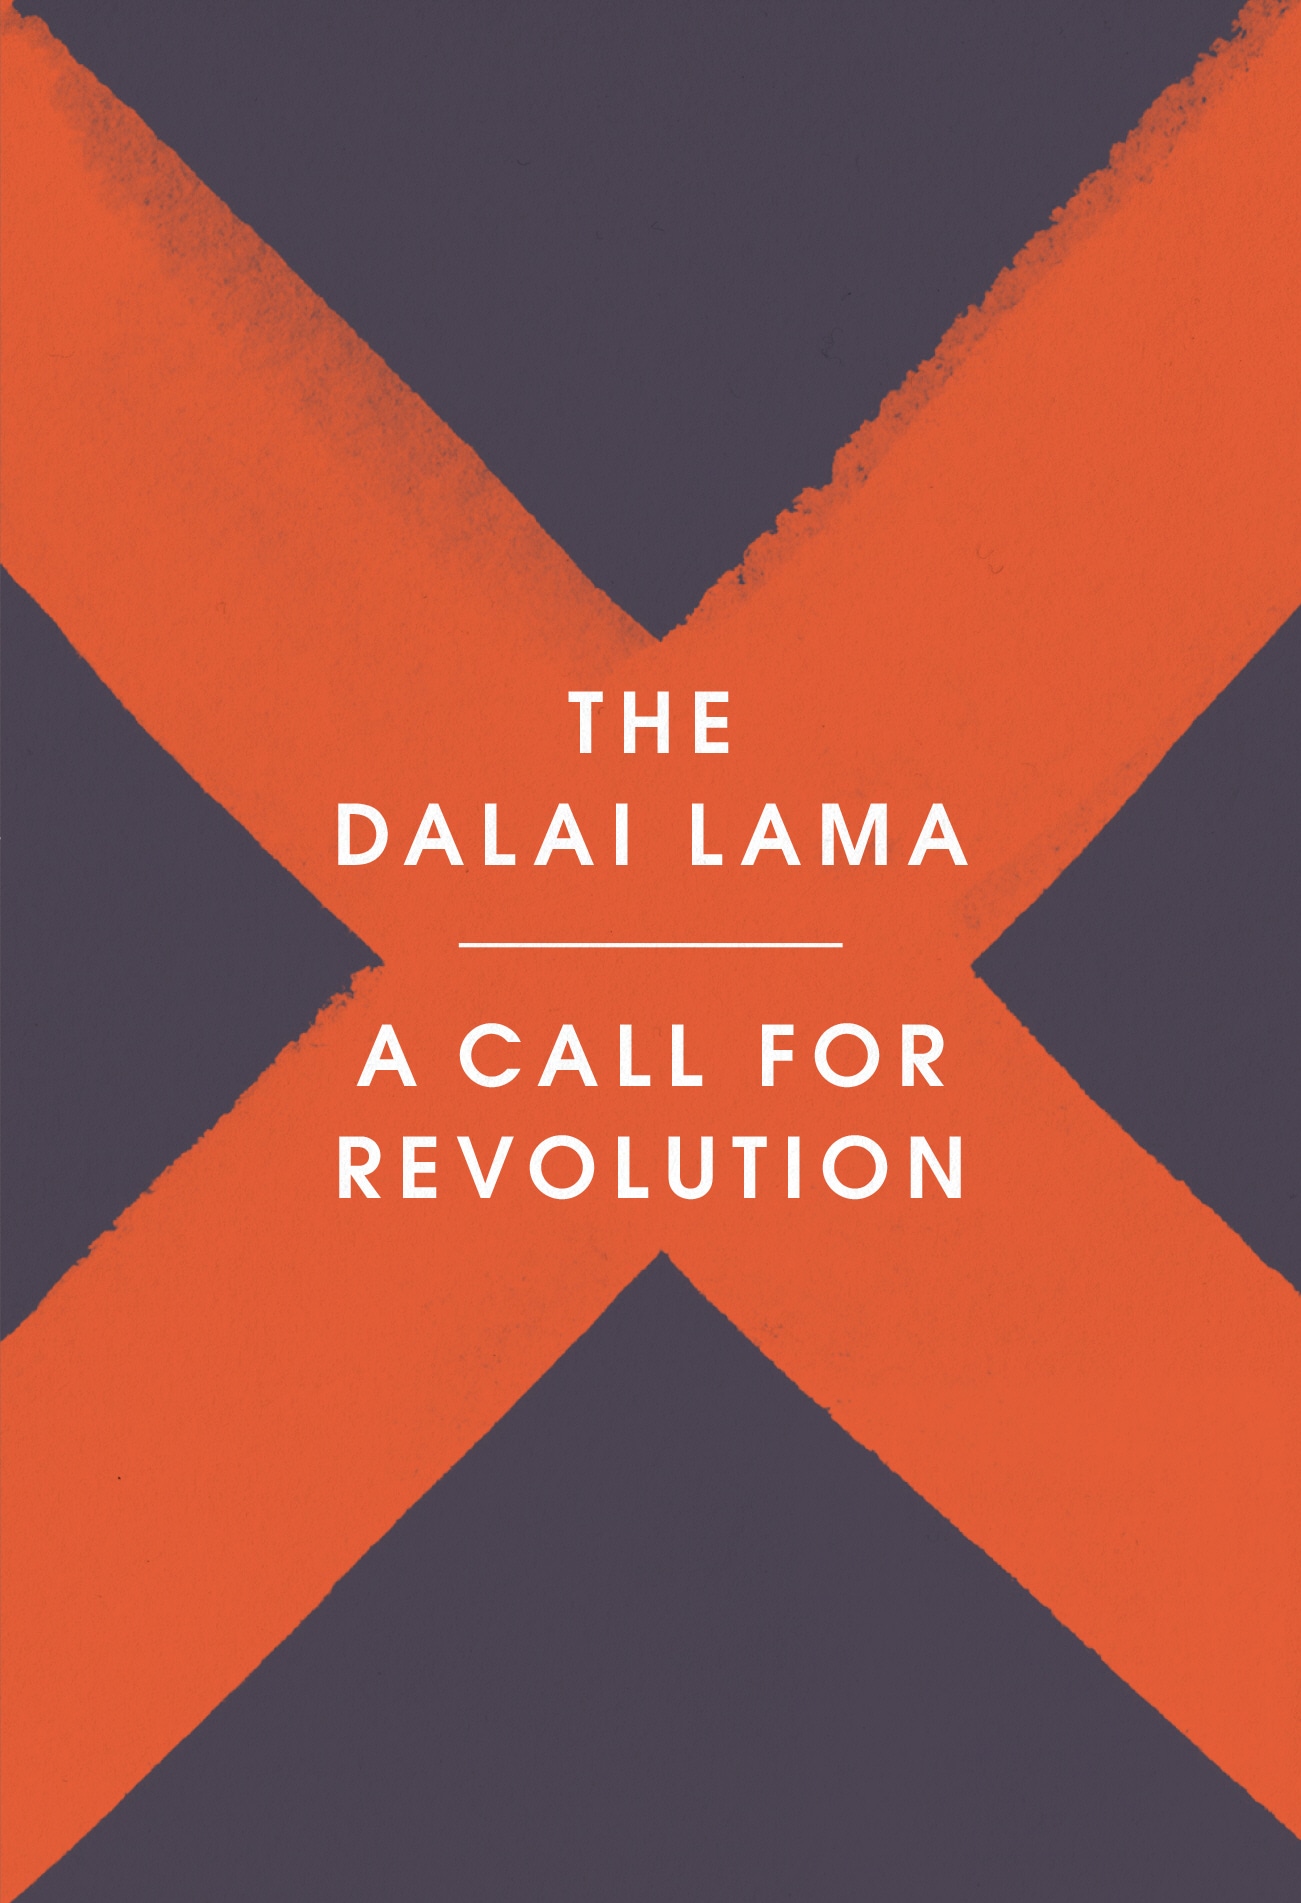 Book “A Call for Revolution” by The Dalai Lama, Sofia Stril-Rever — May 3, 2018